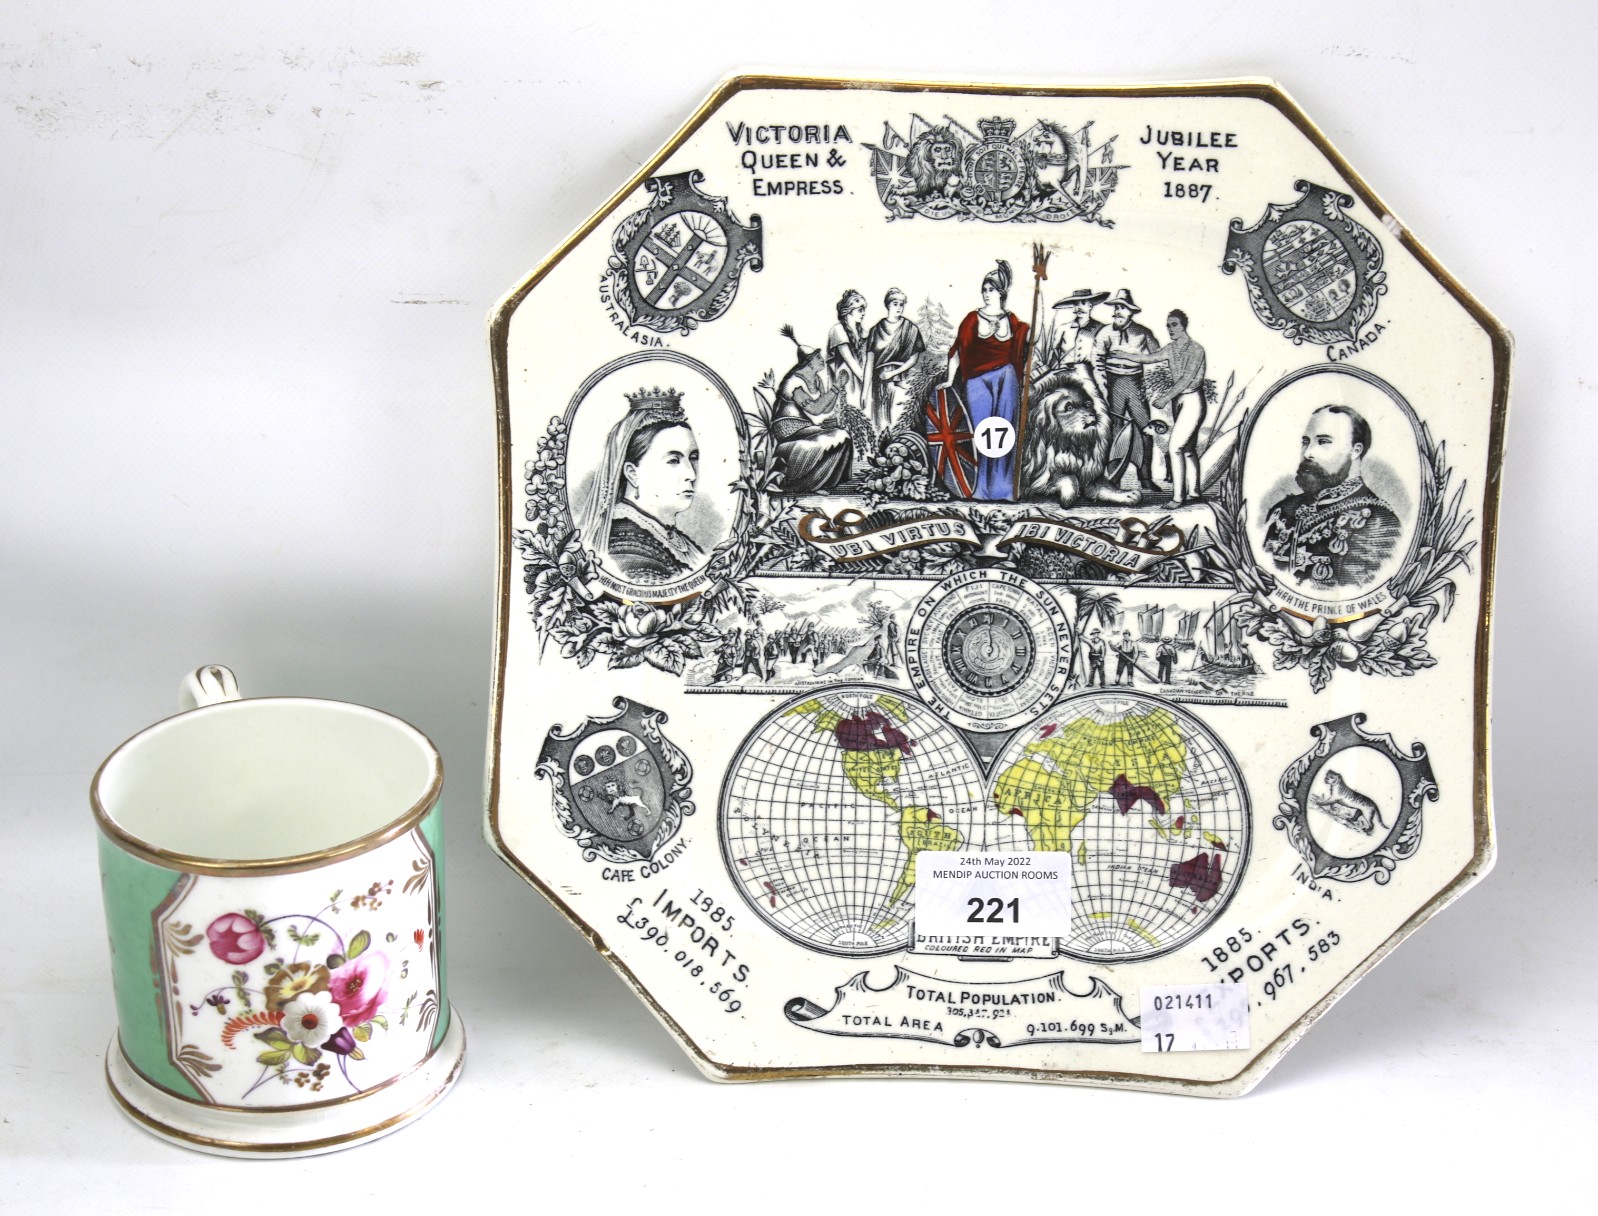 Queen Victoria Diamond Jubilee commemorative plate and a 19th century handpainted floral decorated